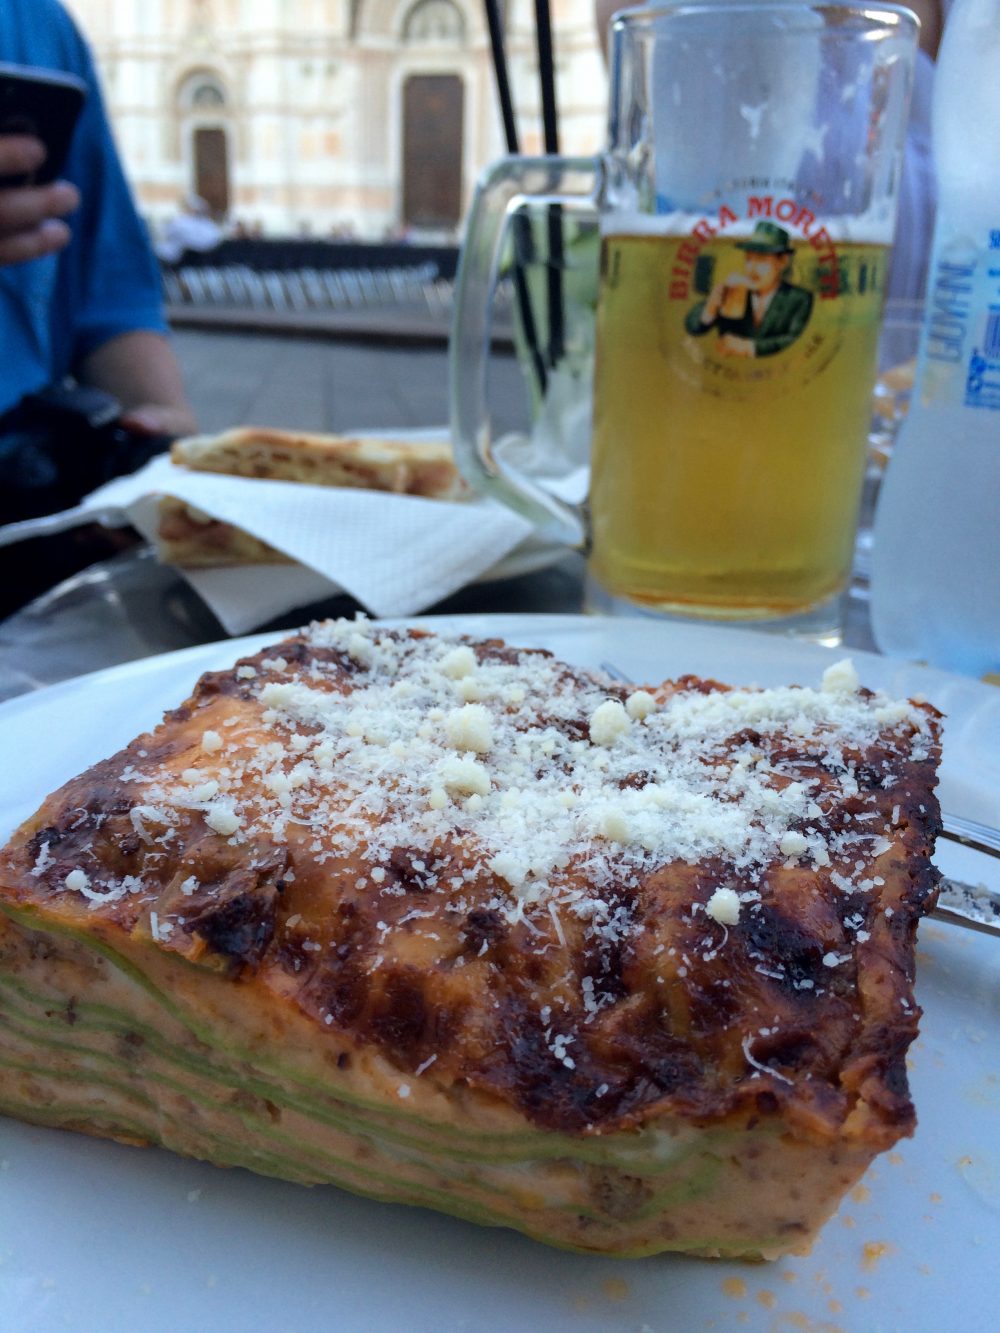 Lasagna verdi alla bolognese is the perfect meal during a layover in Bologna